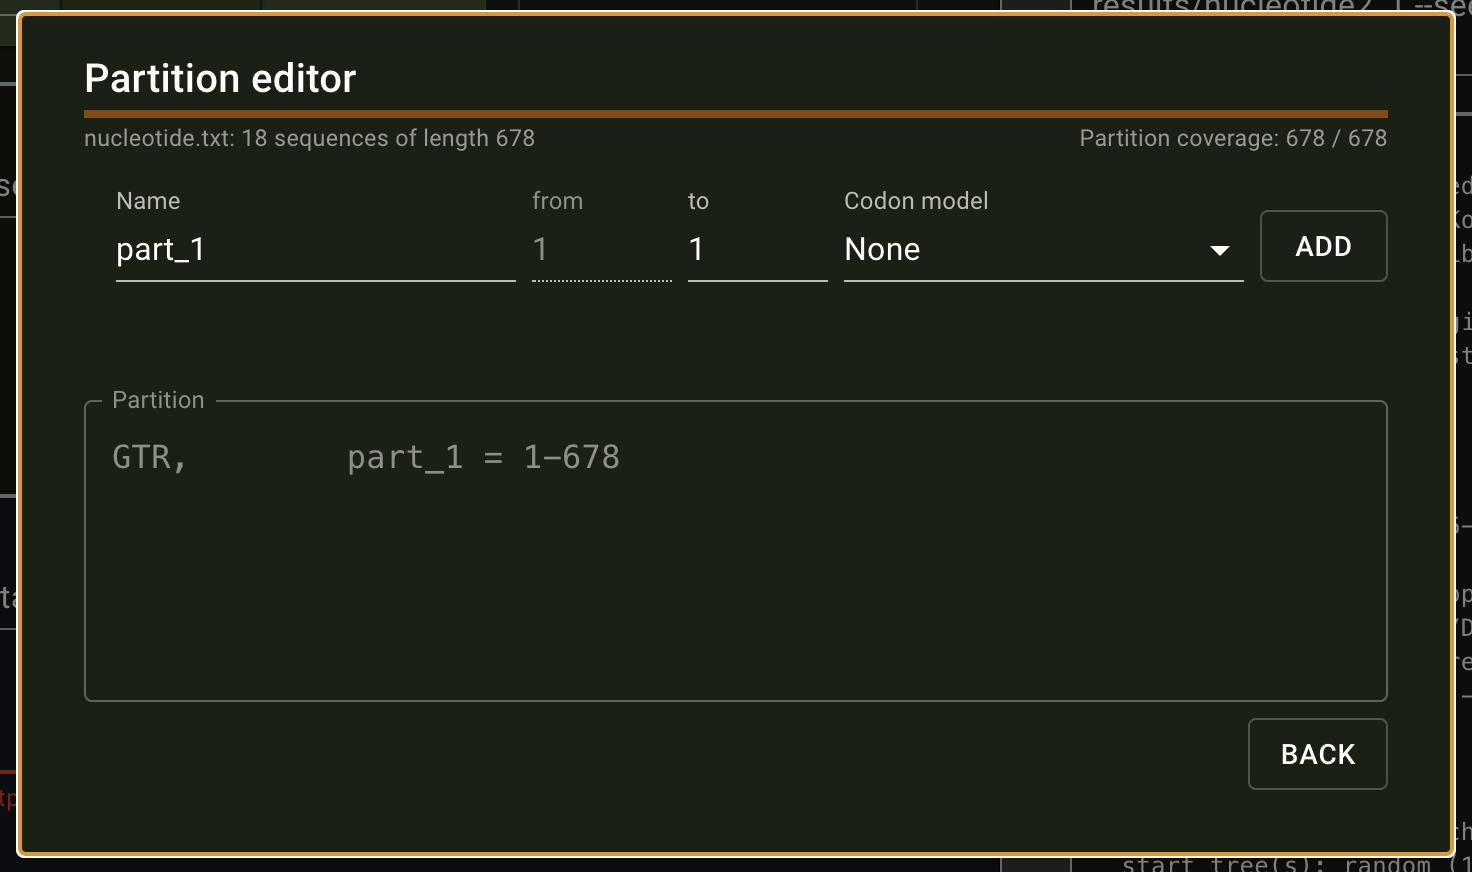 The partition editor in raxmlGUI